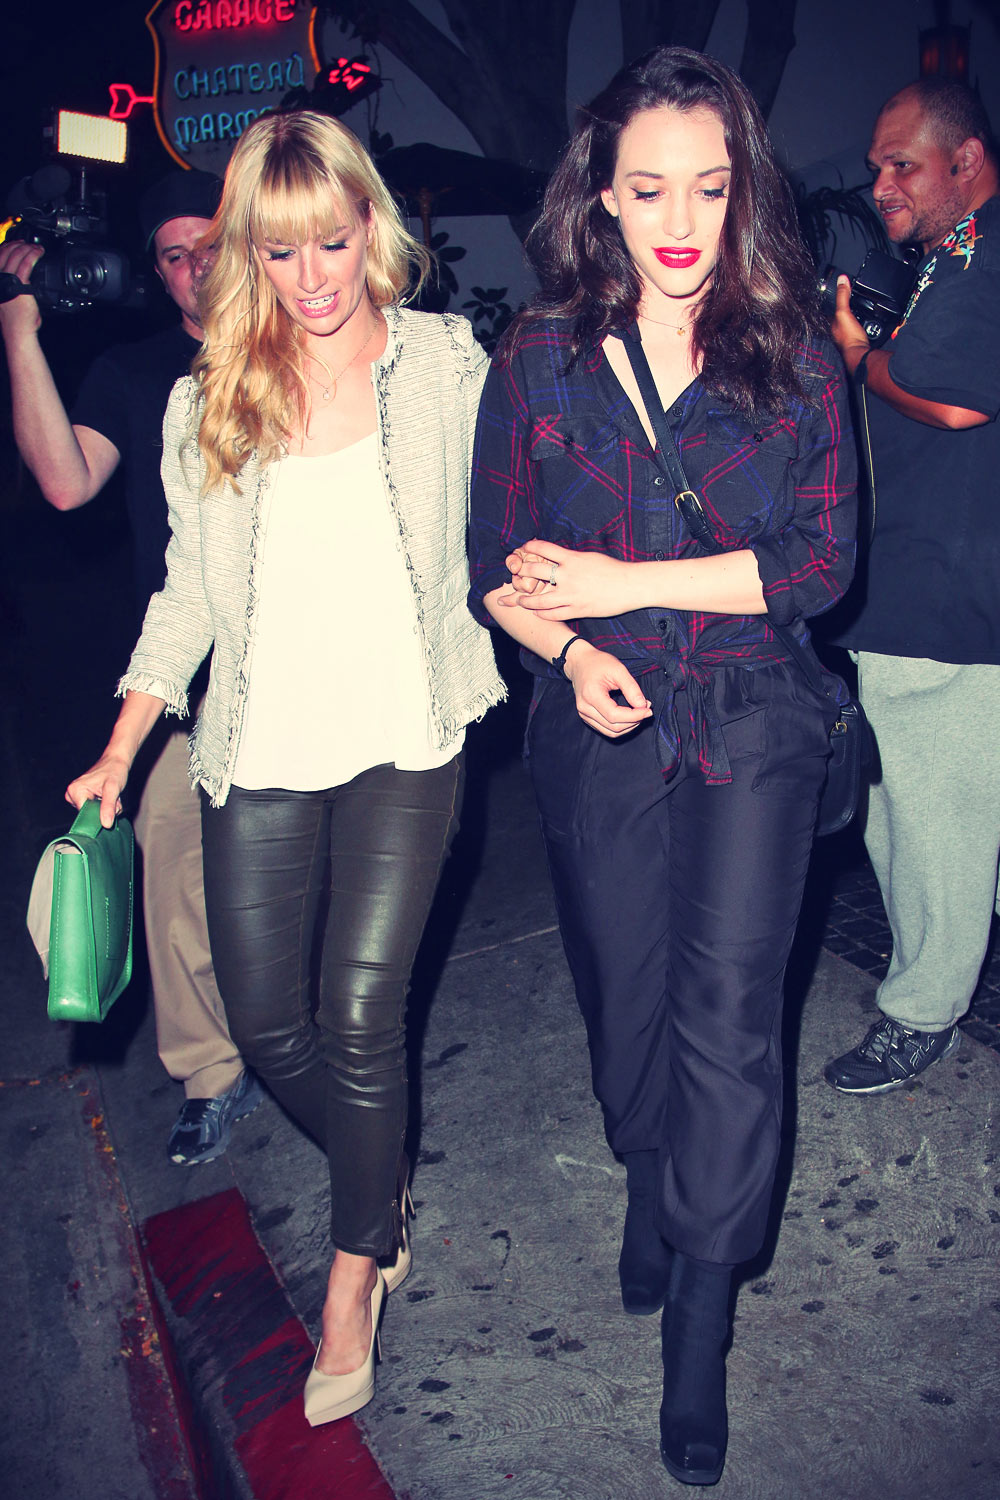 Beth Behrs and Kat Dennings leaving Chateau Marmont